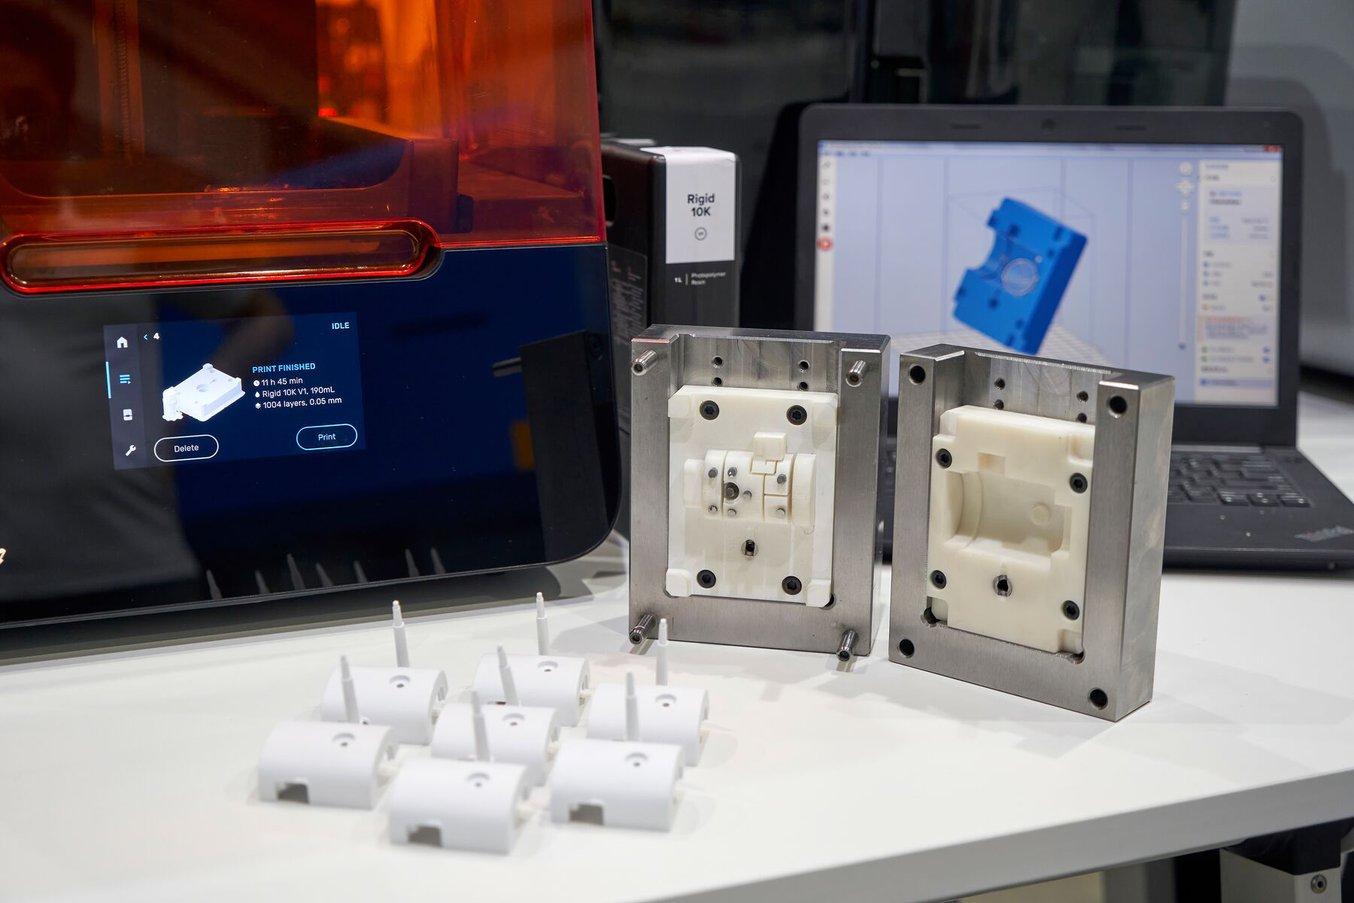 3D printed rapid tooling is ideal for low-volume injection molding.